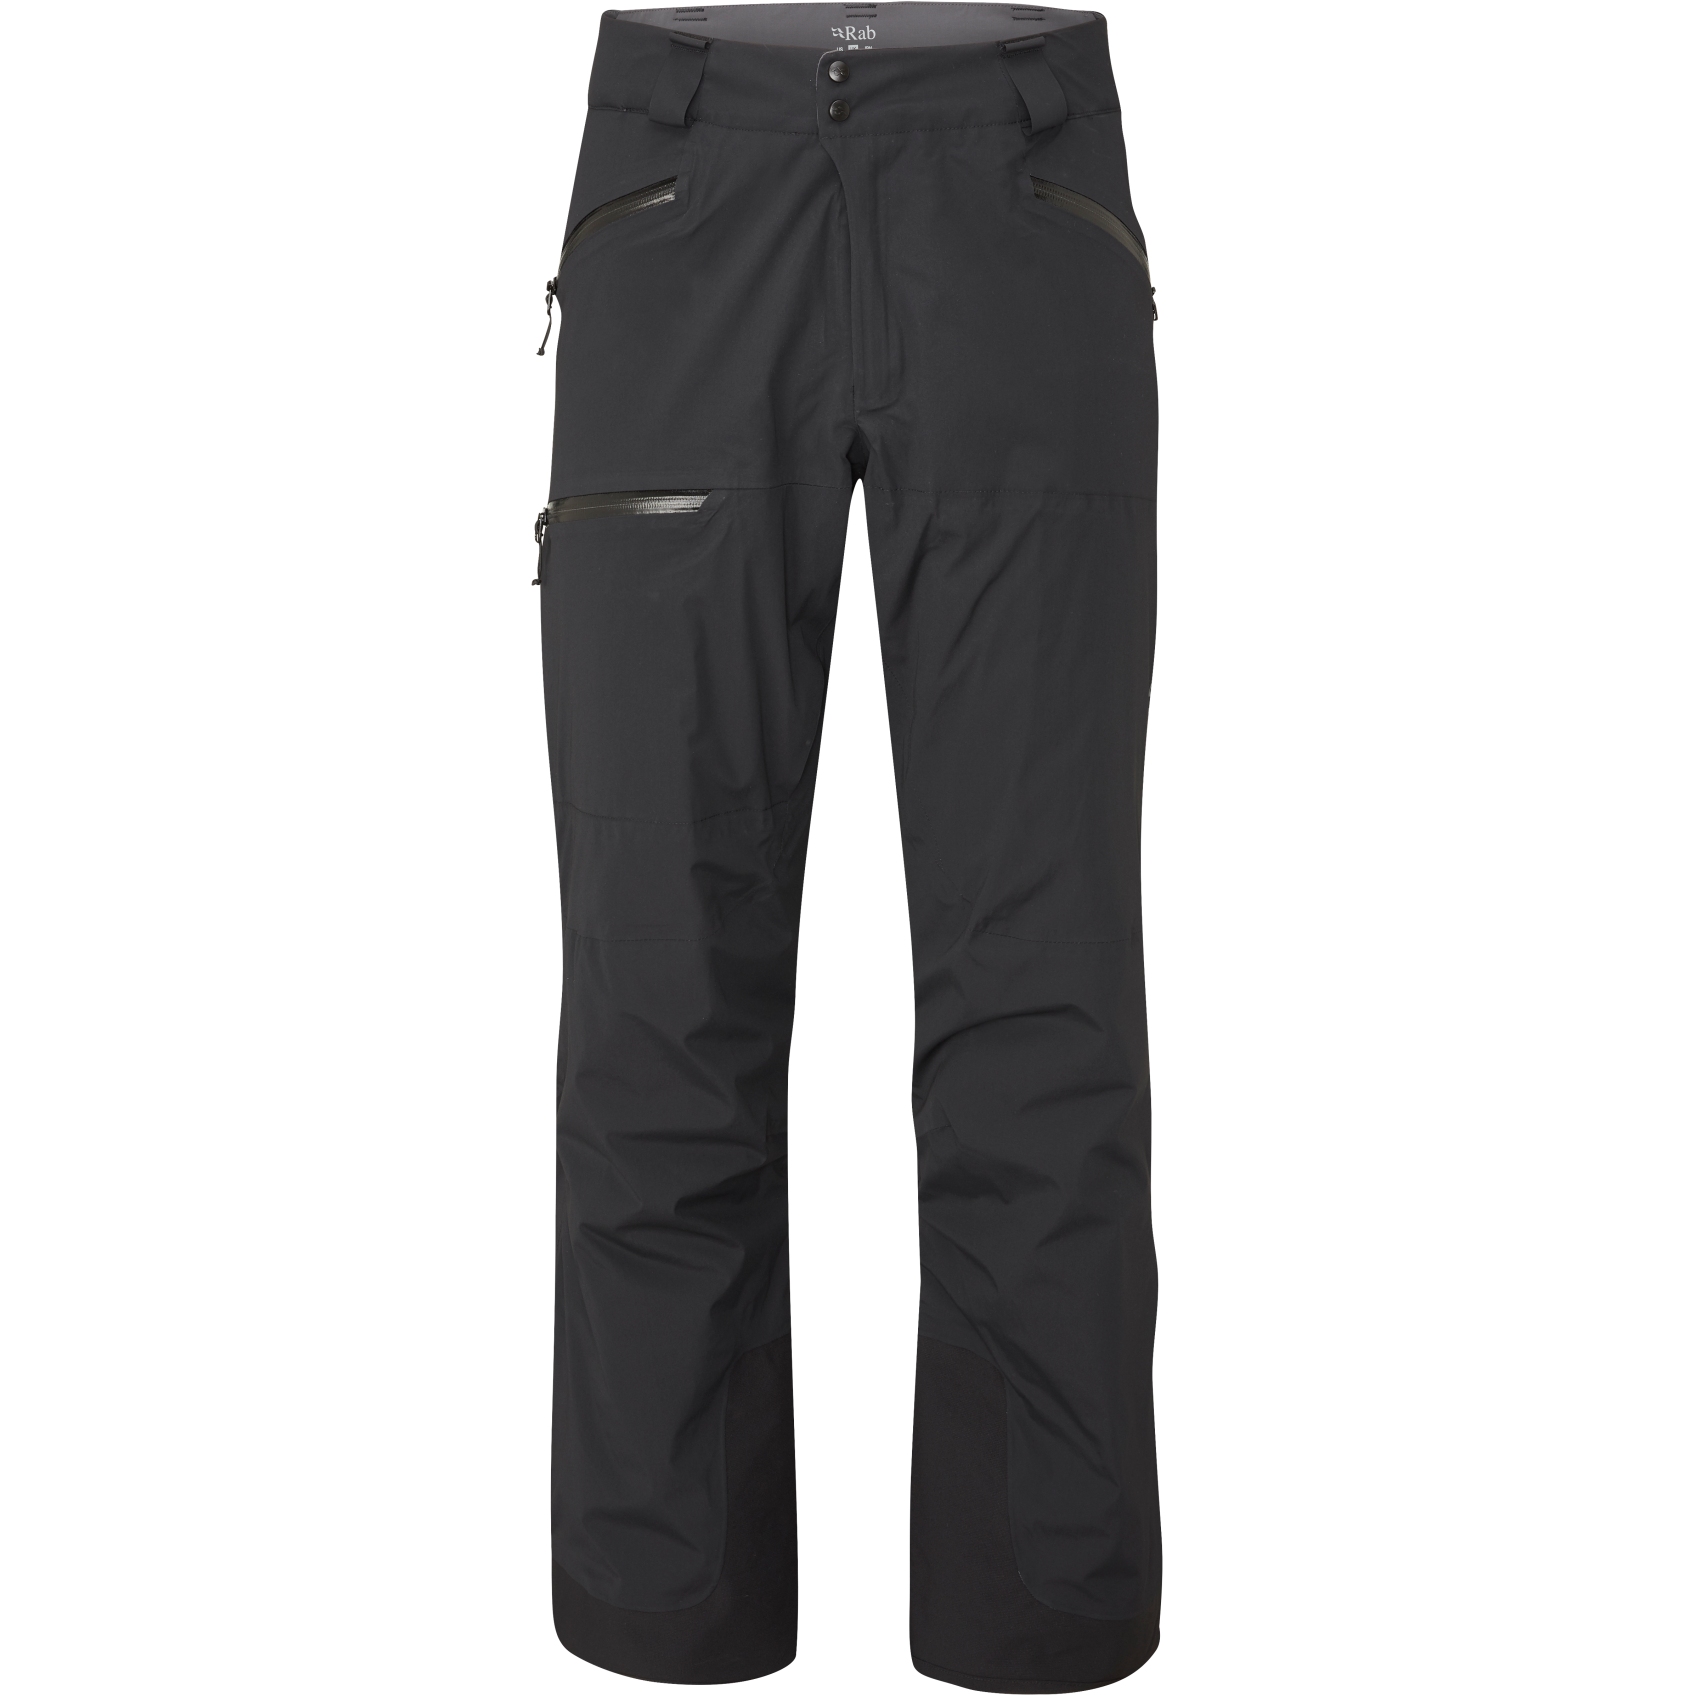 Picture of Rab Khroma Diffract Insulated Pants Men - black